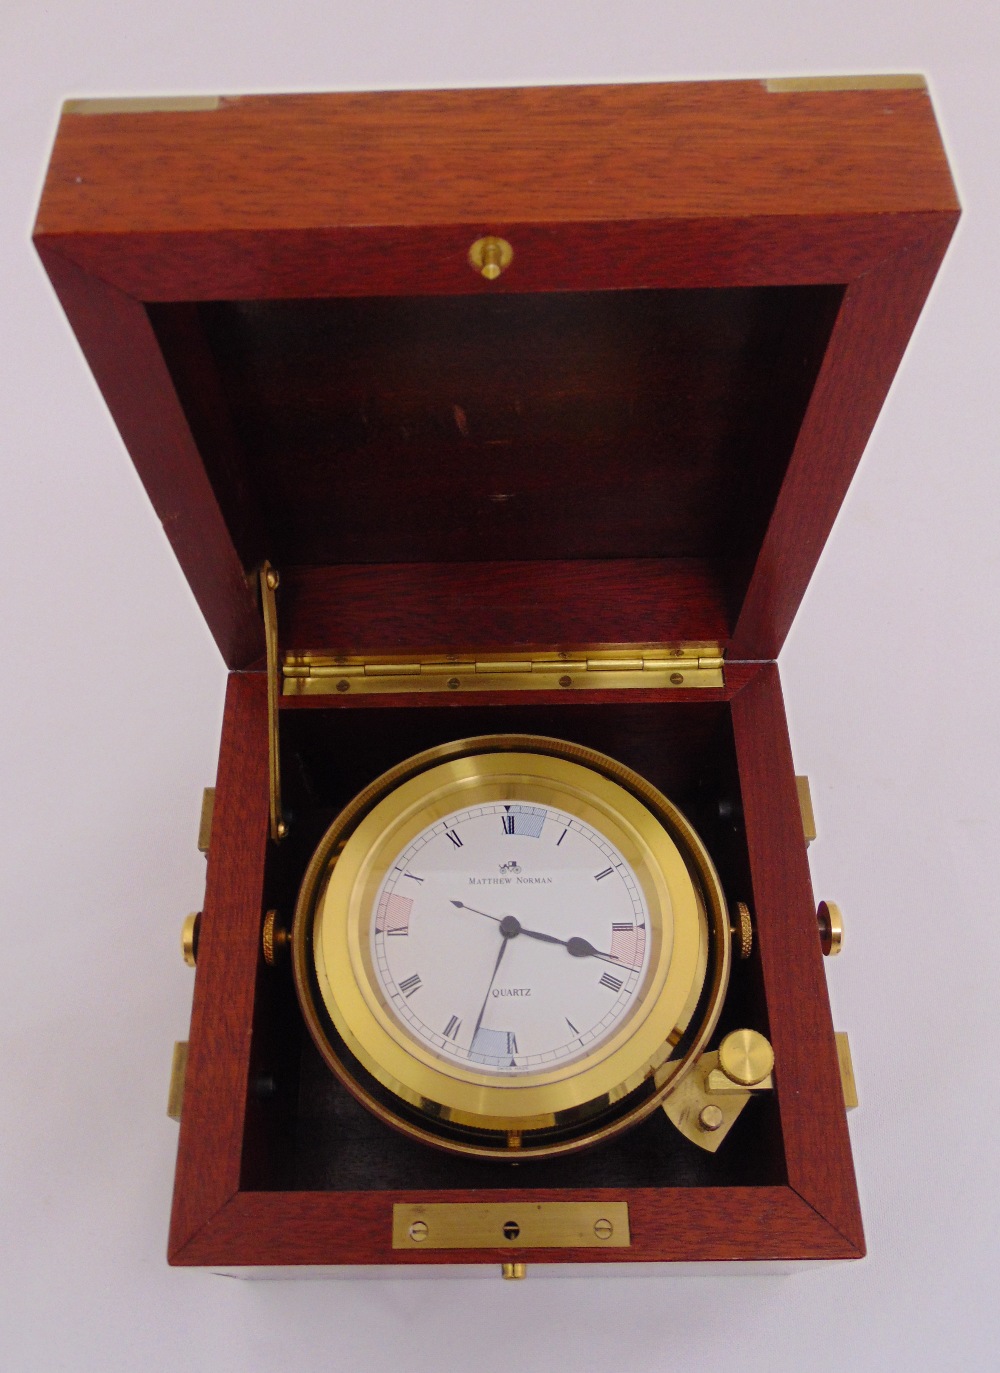 Matthew Norman a quartz nautical gimbal mounted clock in wooden case with hinged cover and brass